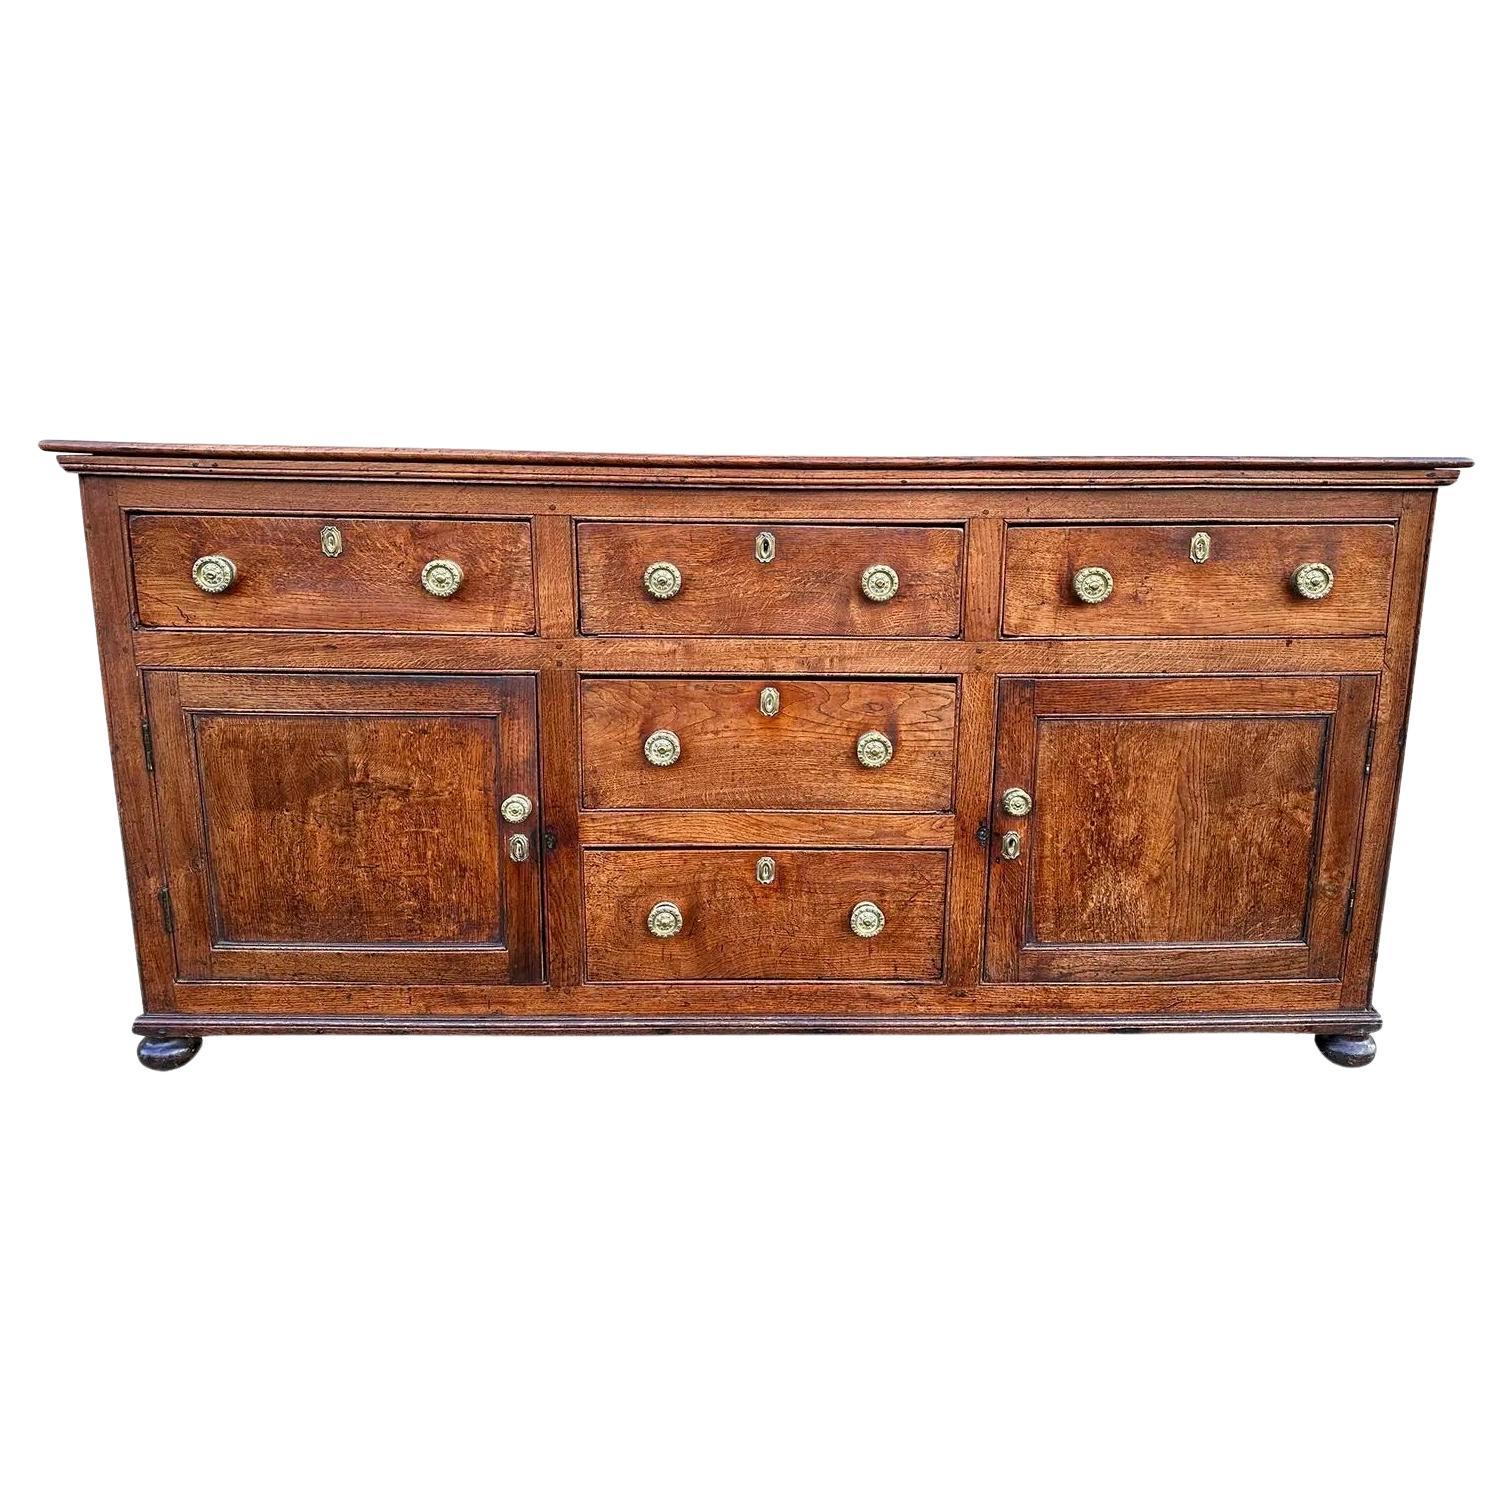 Early 19th Century English Dresser Base For Sale